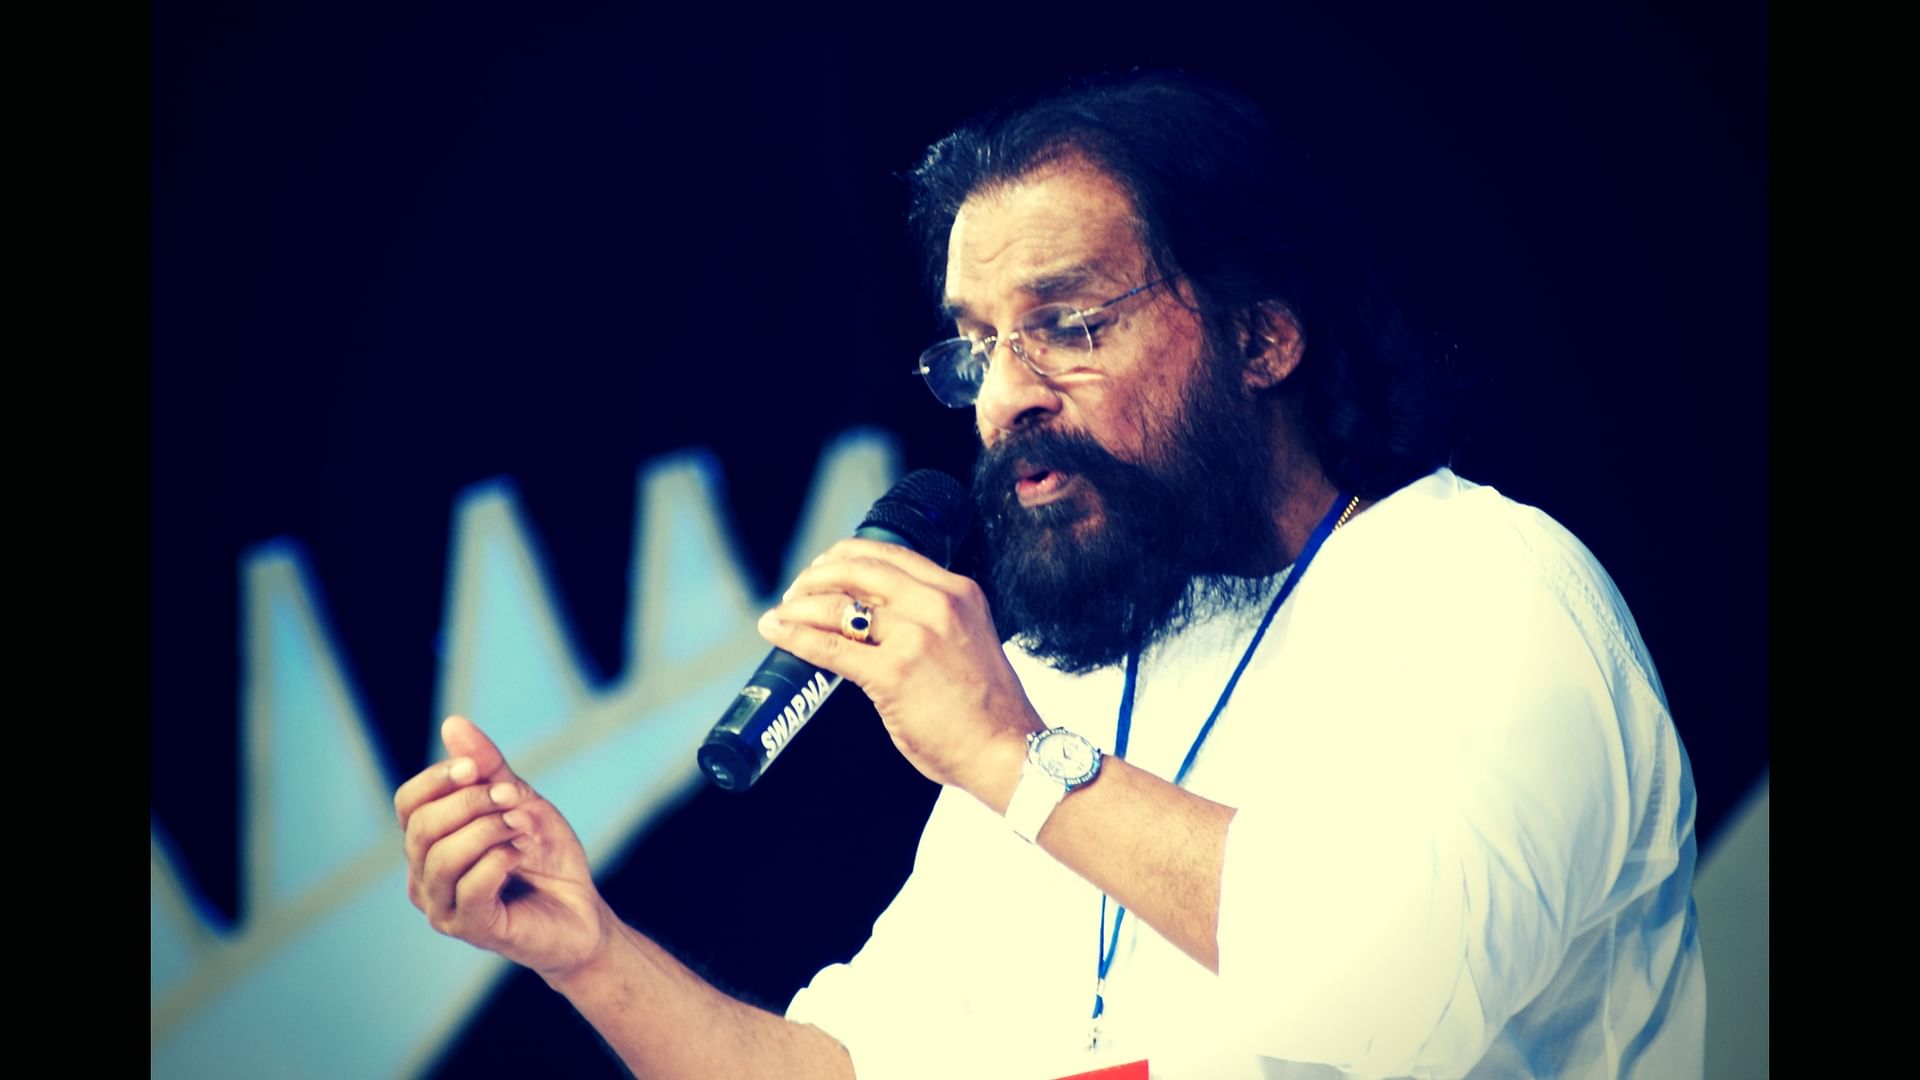 Singer KJ Yesudas’ younger brother has died at 62.